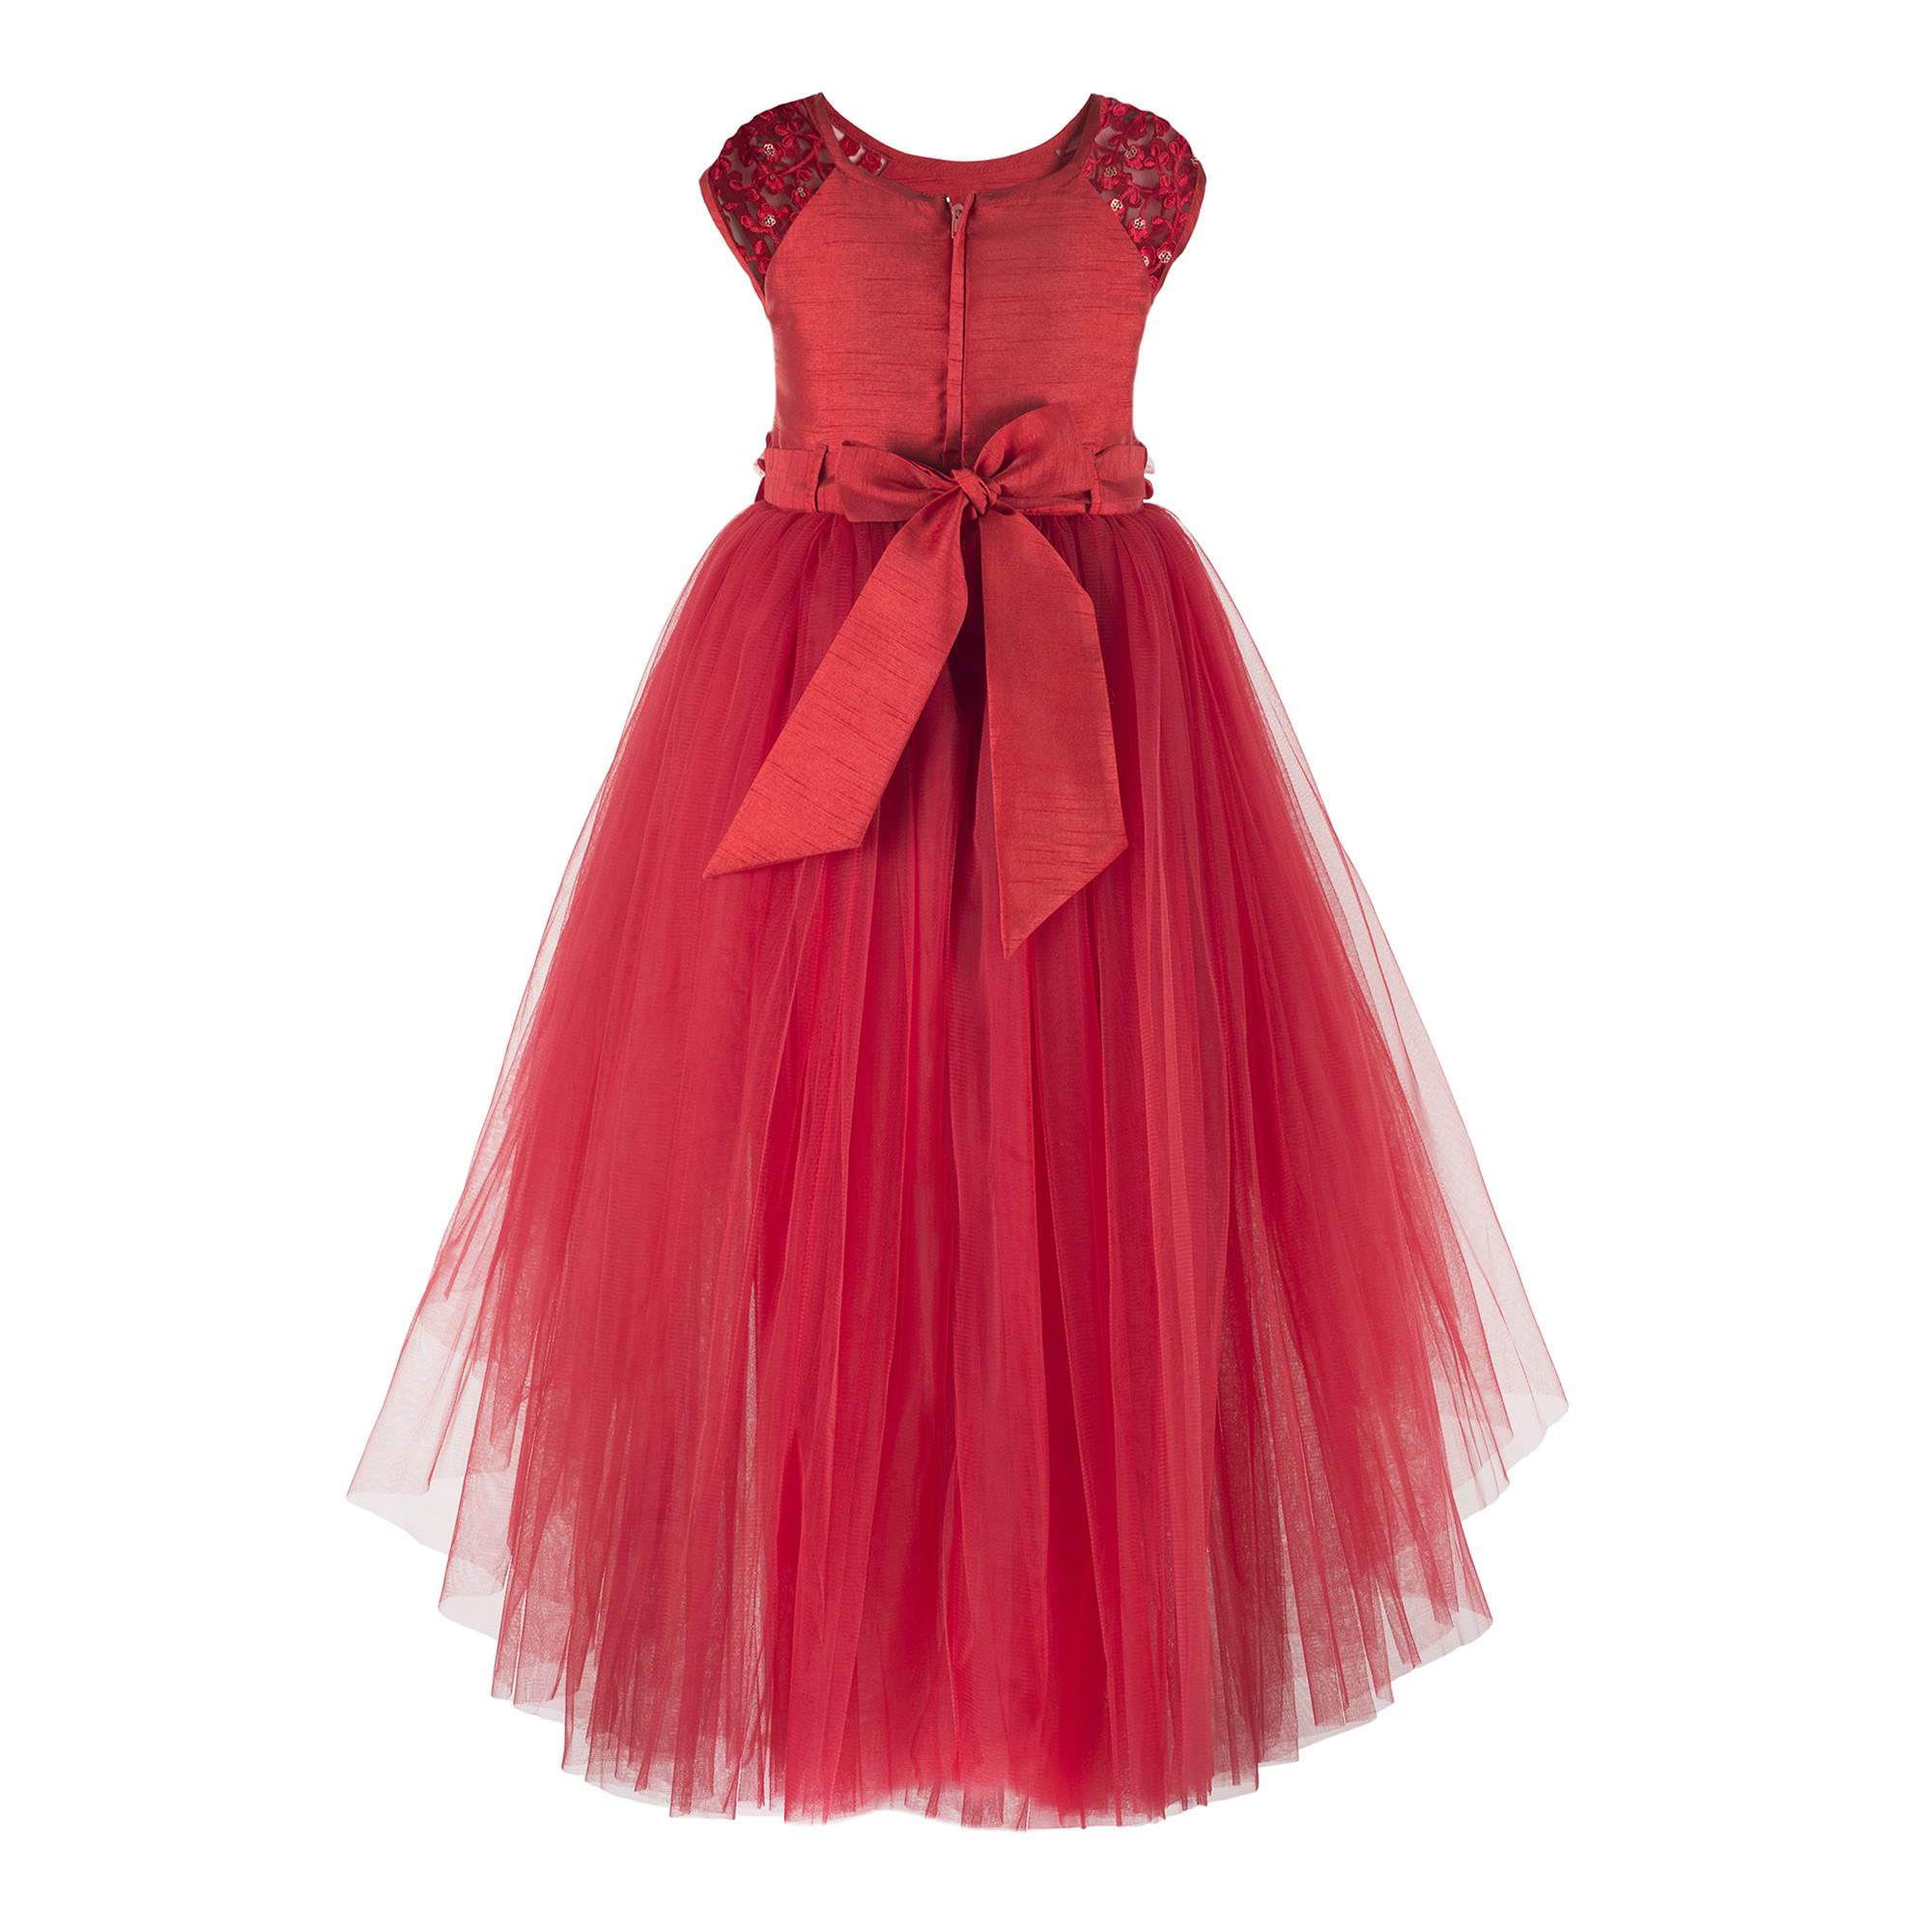 Floral Embroidered Red Girls Hi-low Dress